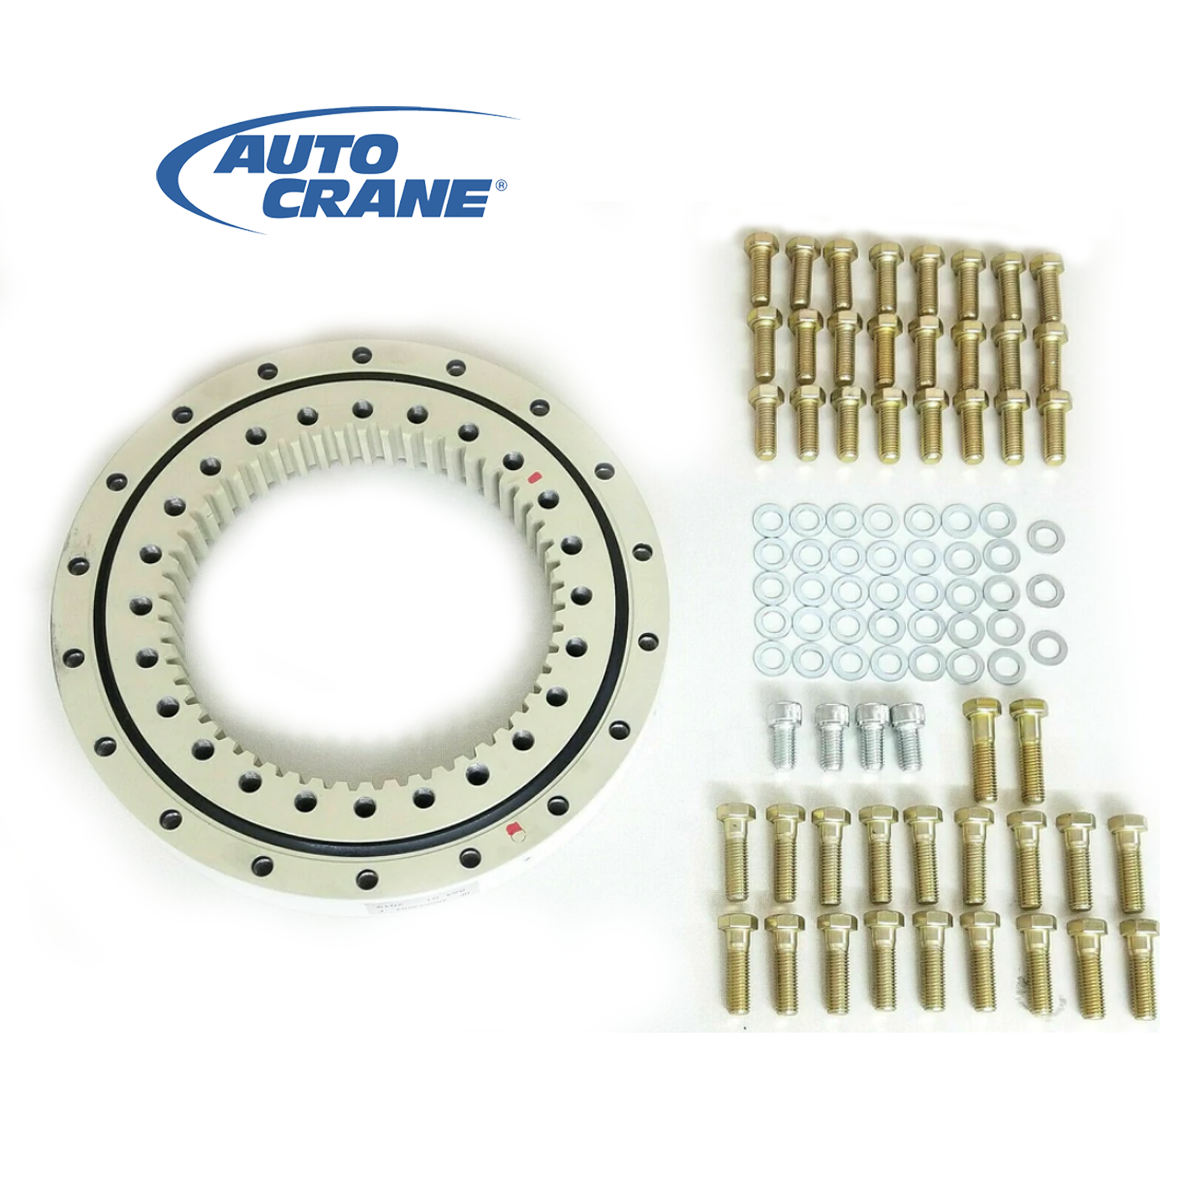 480023010 : KIT REPLACEMENT FOR 480023002